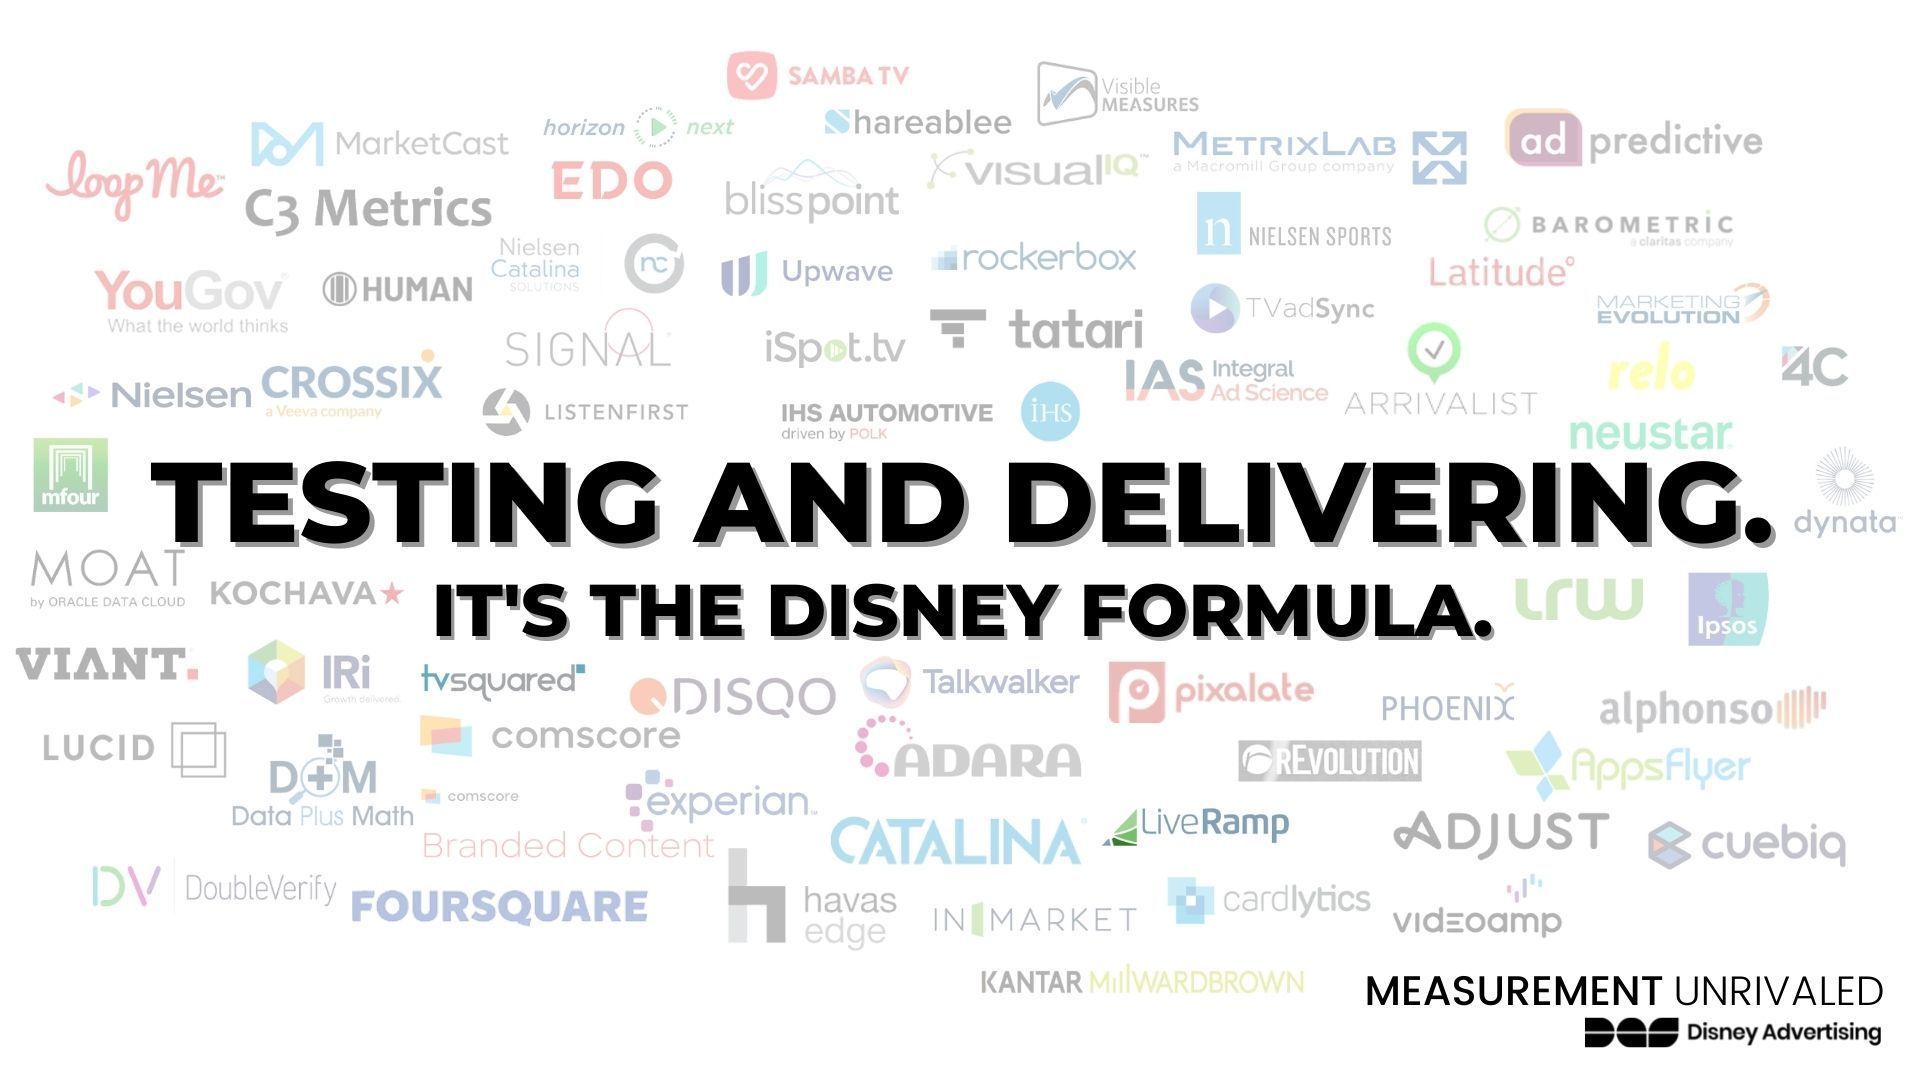 Disney Advertising Takes a Collaborative and Multifaceted Approach to Measurement 